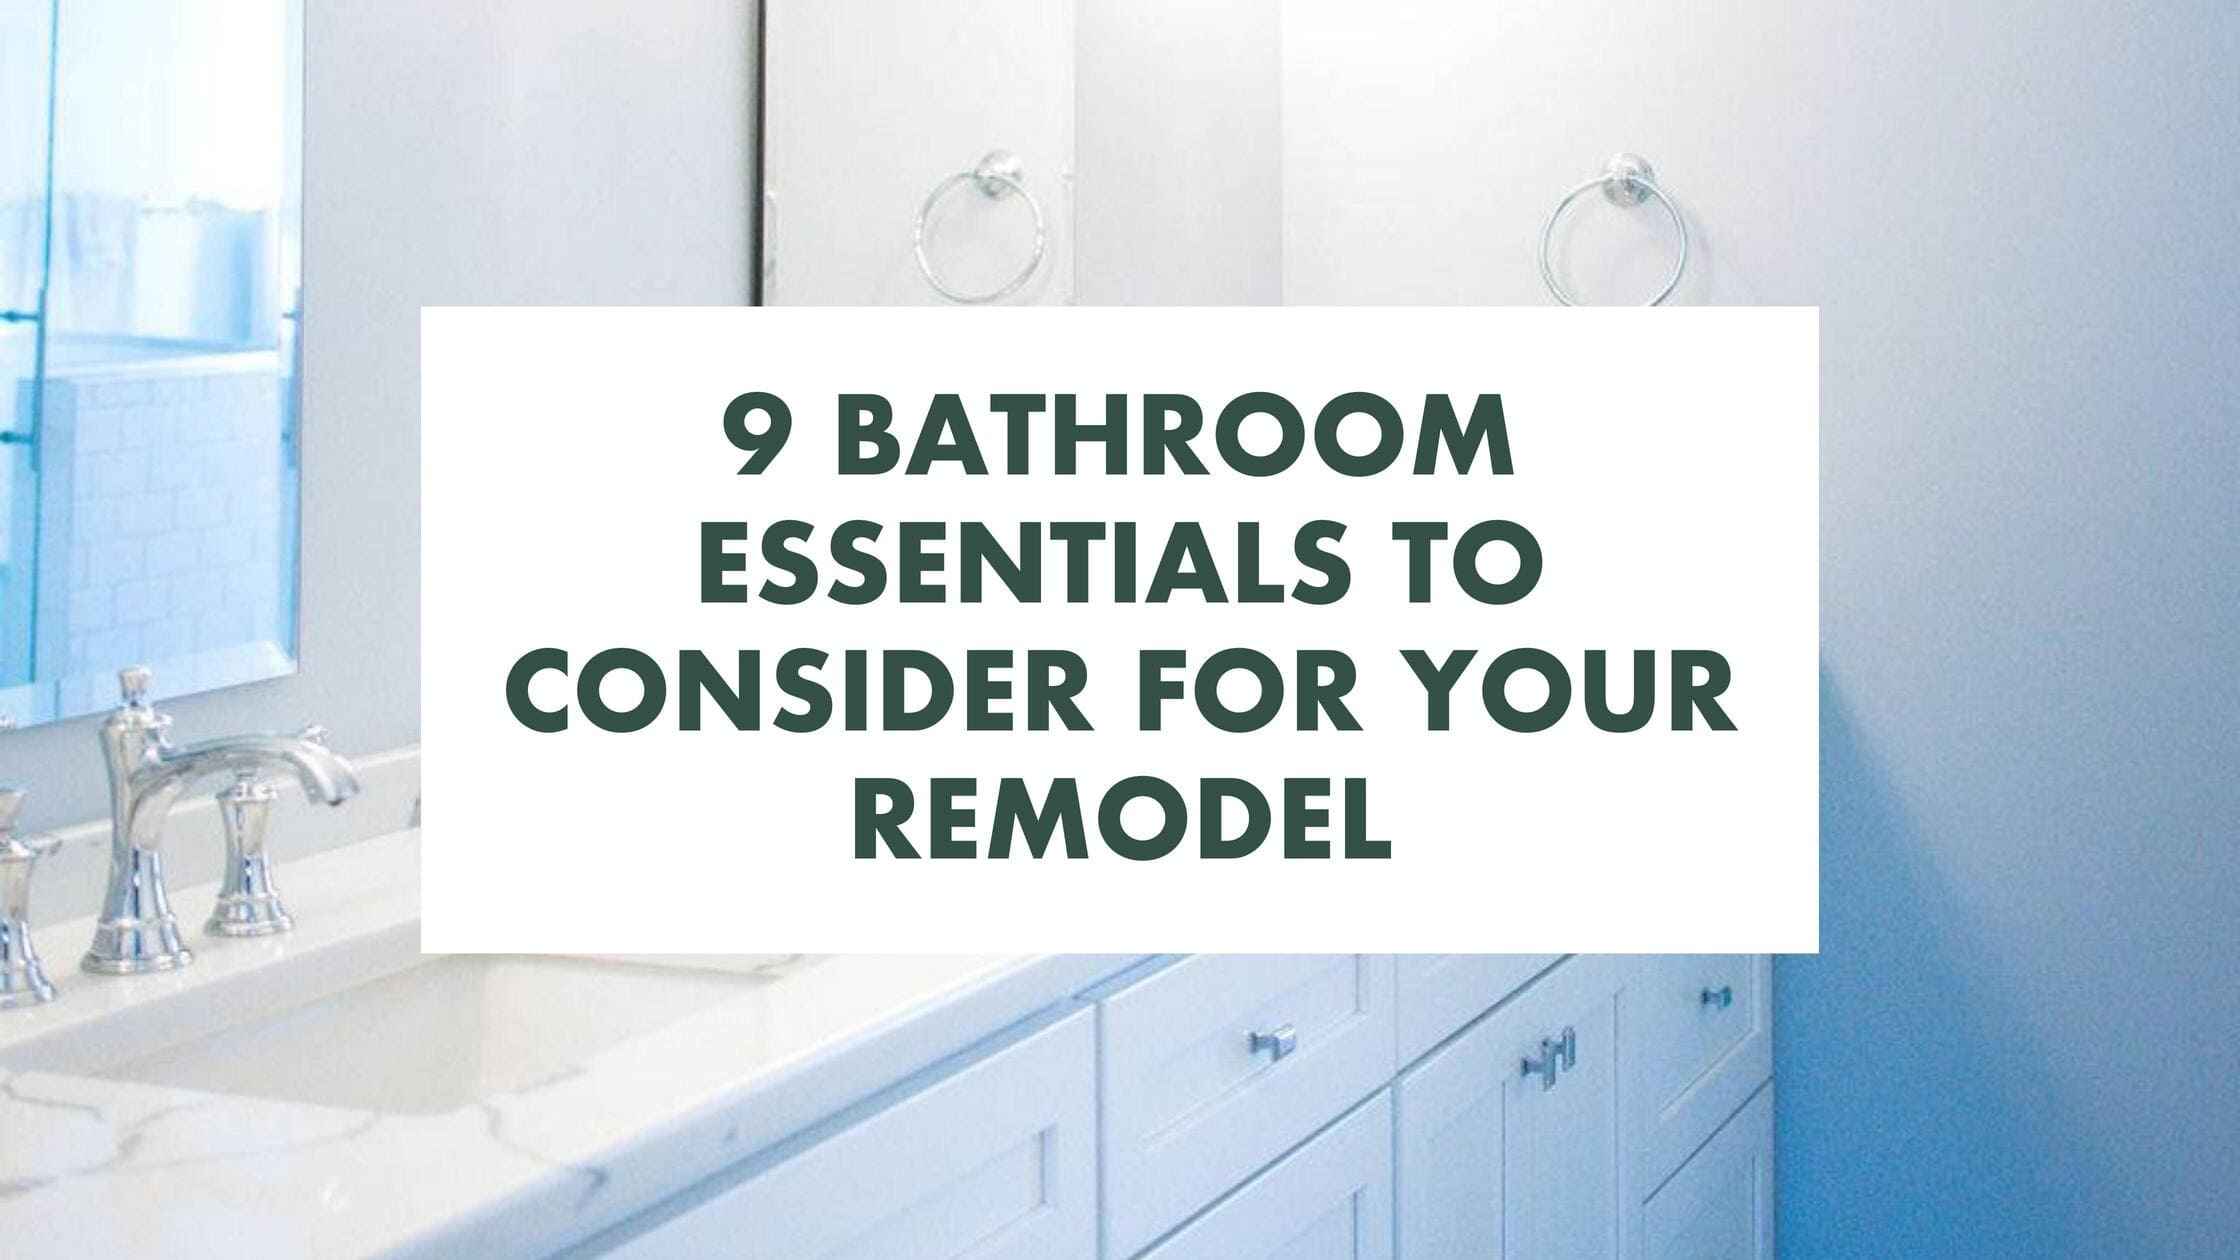 9 Bathroom Essentials to Consider for Your Remodel